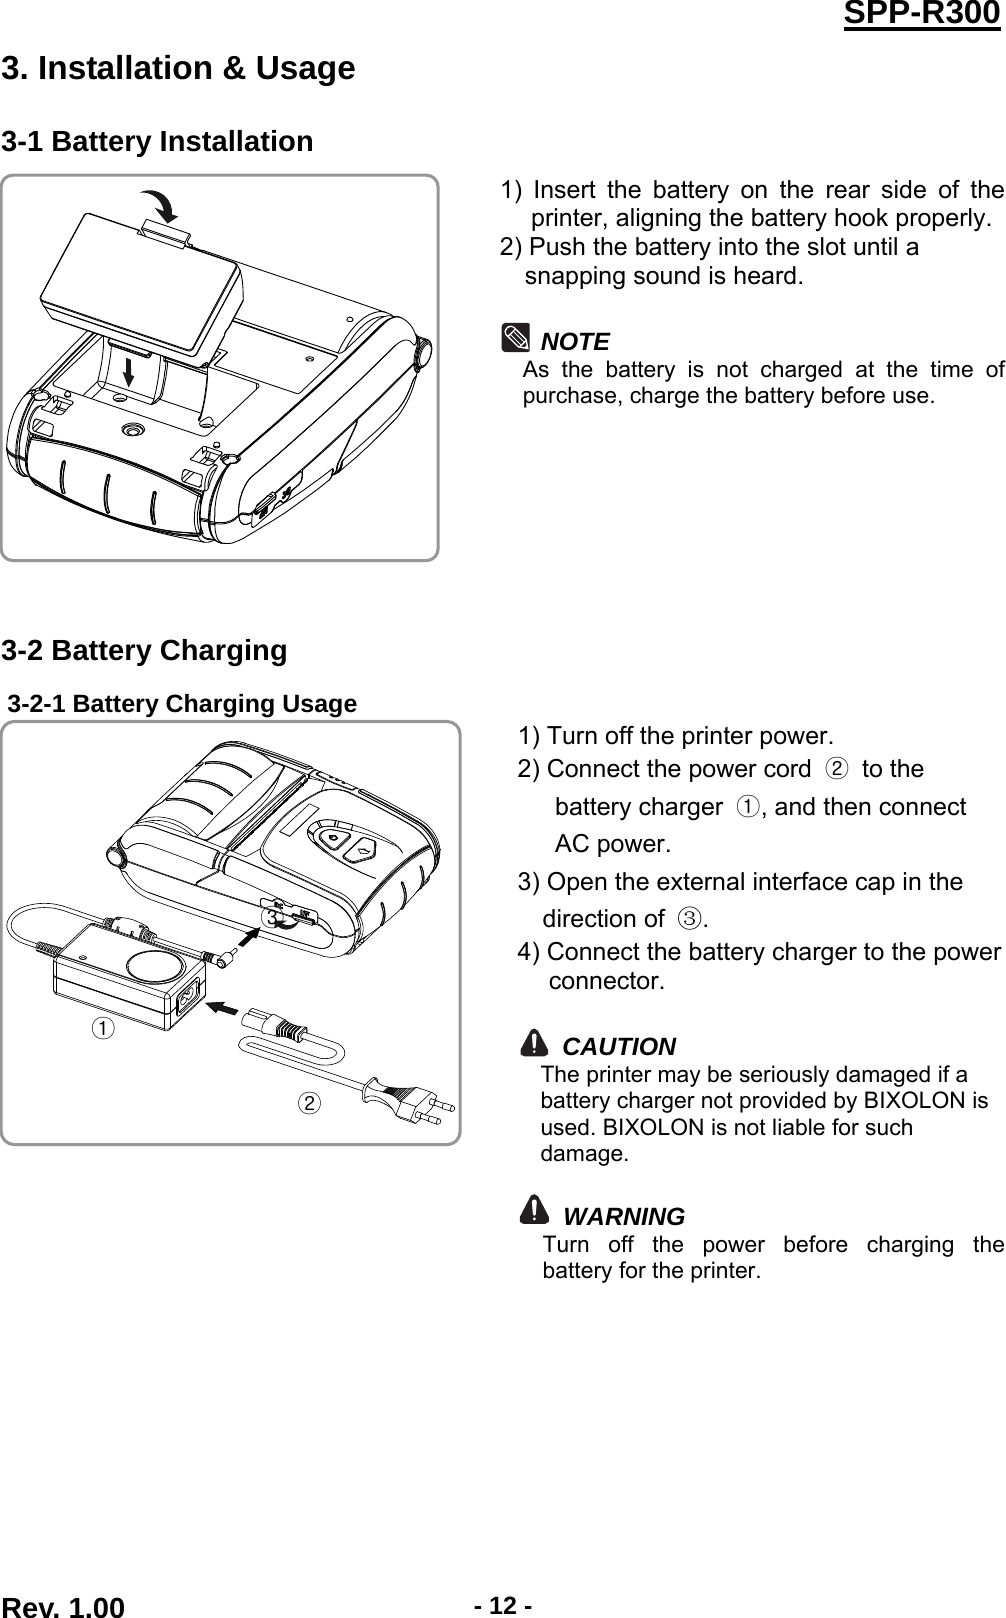  Rev. 1.00  - 12 -SPP-R3003. Installation &amp; Usage 3-1 Battery Installation  1) Insert the battery on the rear side of the printer, aligning the battery hook properly. 2) Push the battery into the slot until a   snapping sound is heard.  NOTE As the battery is not charged at the time of purchase, charge the battery before use.  3-2 Battery Charging 3-2-1 Battery Charging Usage  1) Turn off the printer power. 2) Connect the power cord  ② to the  battery charger  ①, and then connect   AC power. 3) Open the external interface cap in the   direction of  ③. 4) Connect the battery charger to the power connector.  CAUTION The printer may be seriously damaged if a battery charger not provided by BIXOLON is used. BIXOLON is not liable for such damage.   WARNING Turn off the power before charging the battery for the printer. ① ② ③ 